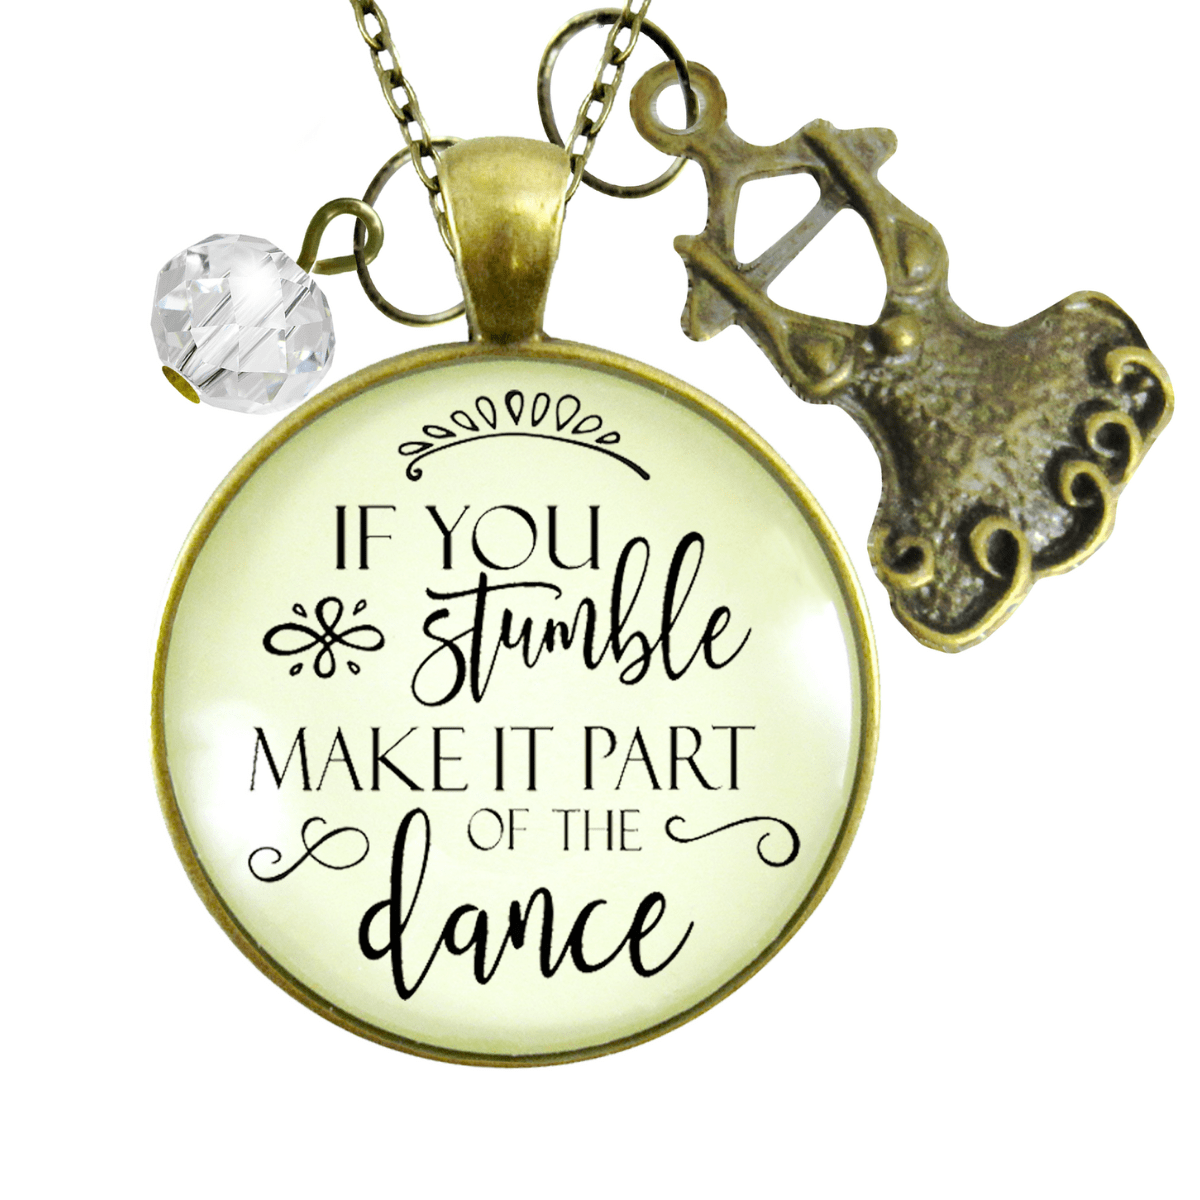 Gutsy Goodness Inspirational Necklace If You Stumble Dance Quote Jewelry Tutu Charm - Gutsy Goodness Handmade Jewelry;Inspirational Necklace If You Stumble Dance Quote Jewelry Tutu Charm - Gutsy Goodness Handmade Jewelry Gifts